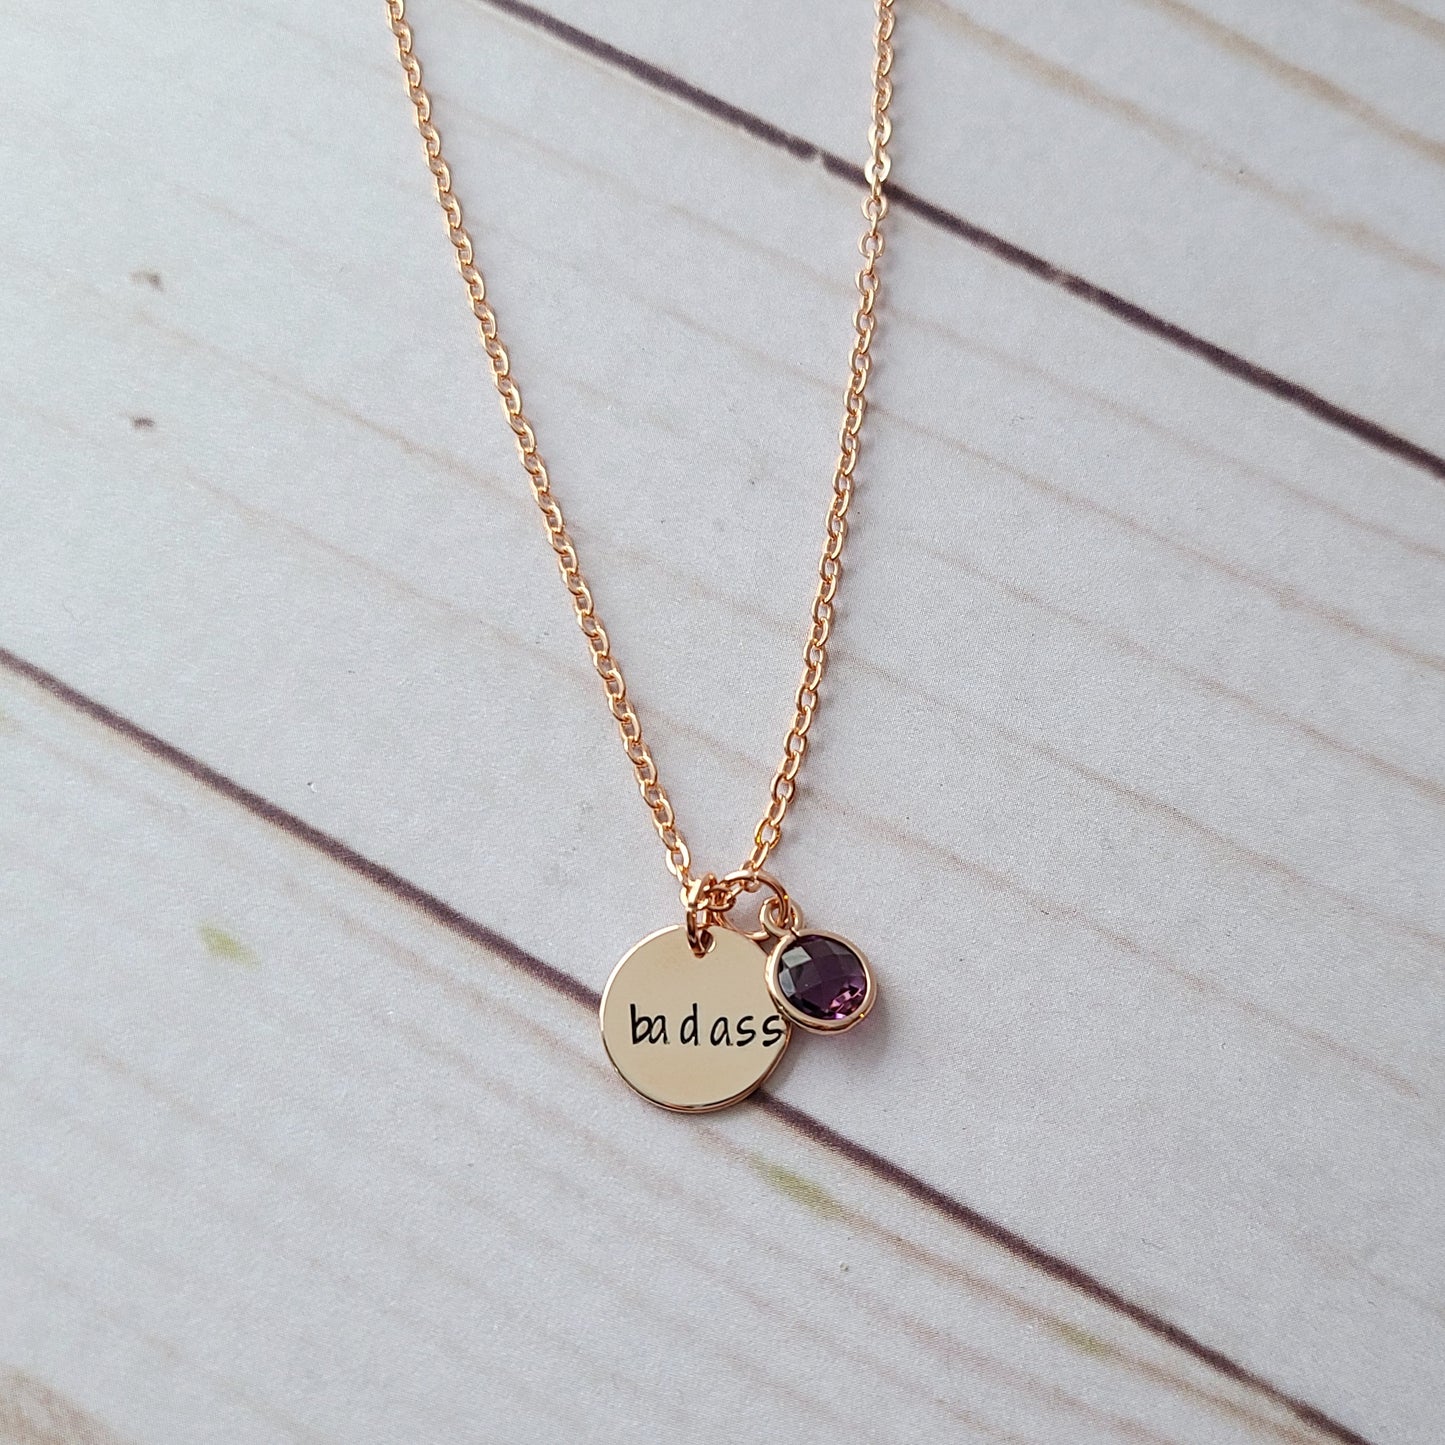 Tiny Rose Gold Badass Disc Necklace - Choose Your Word